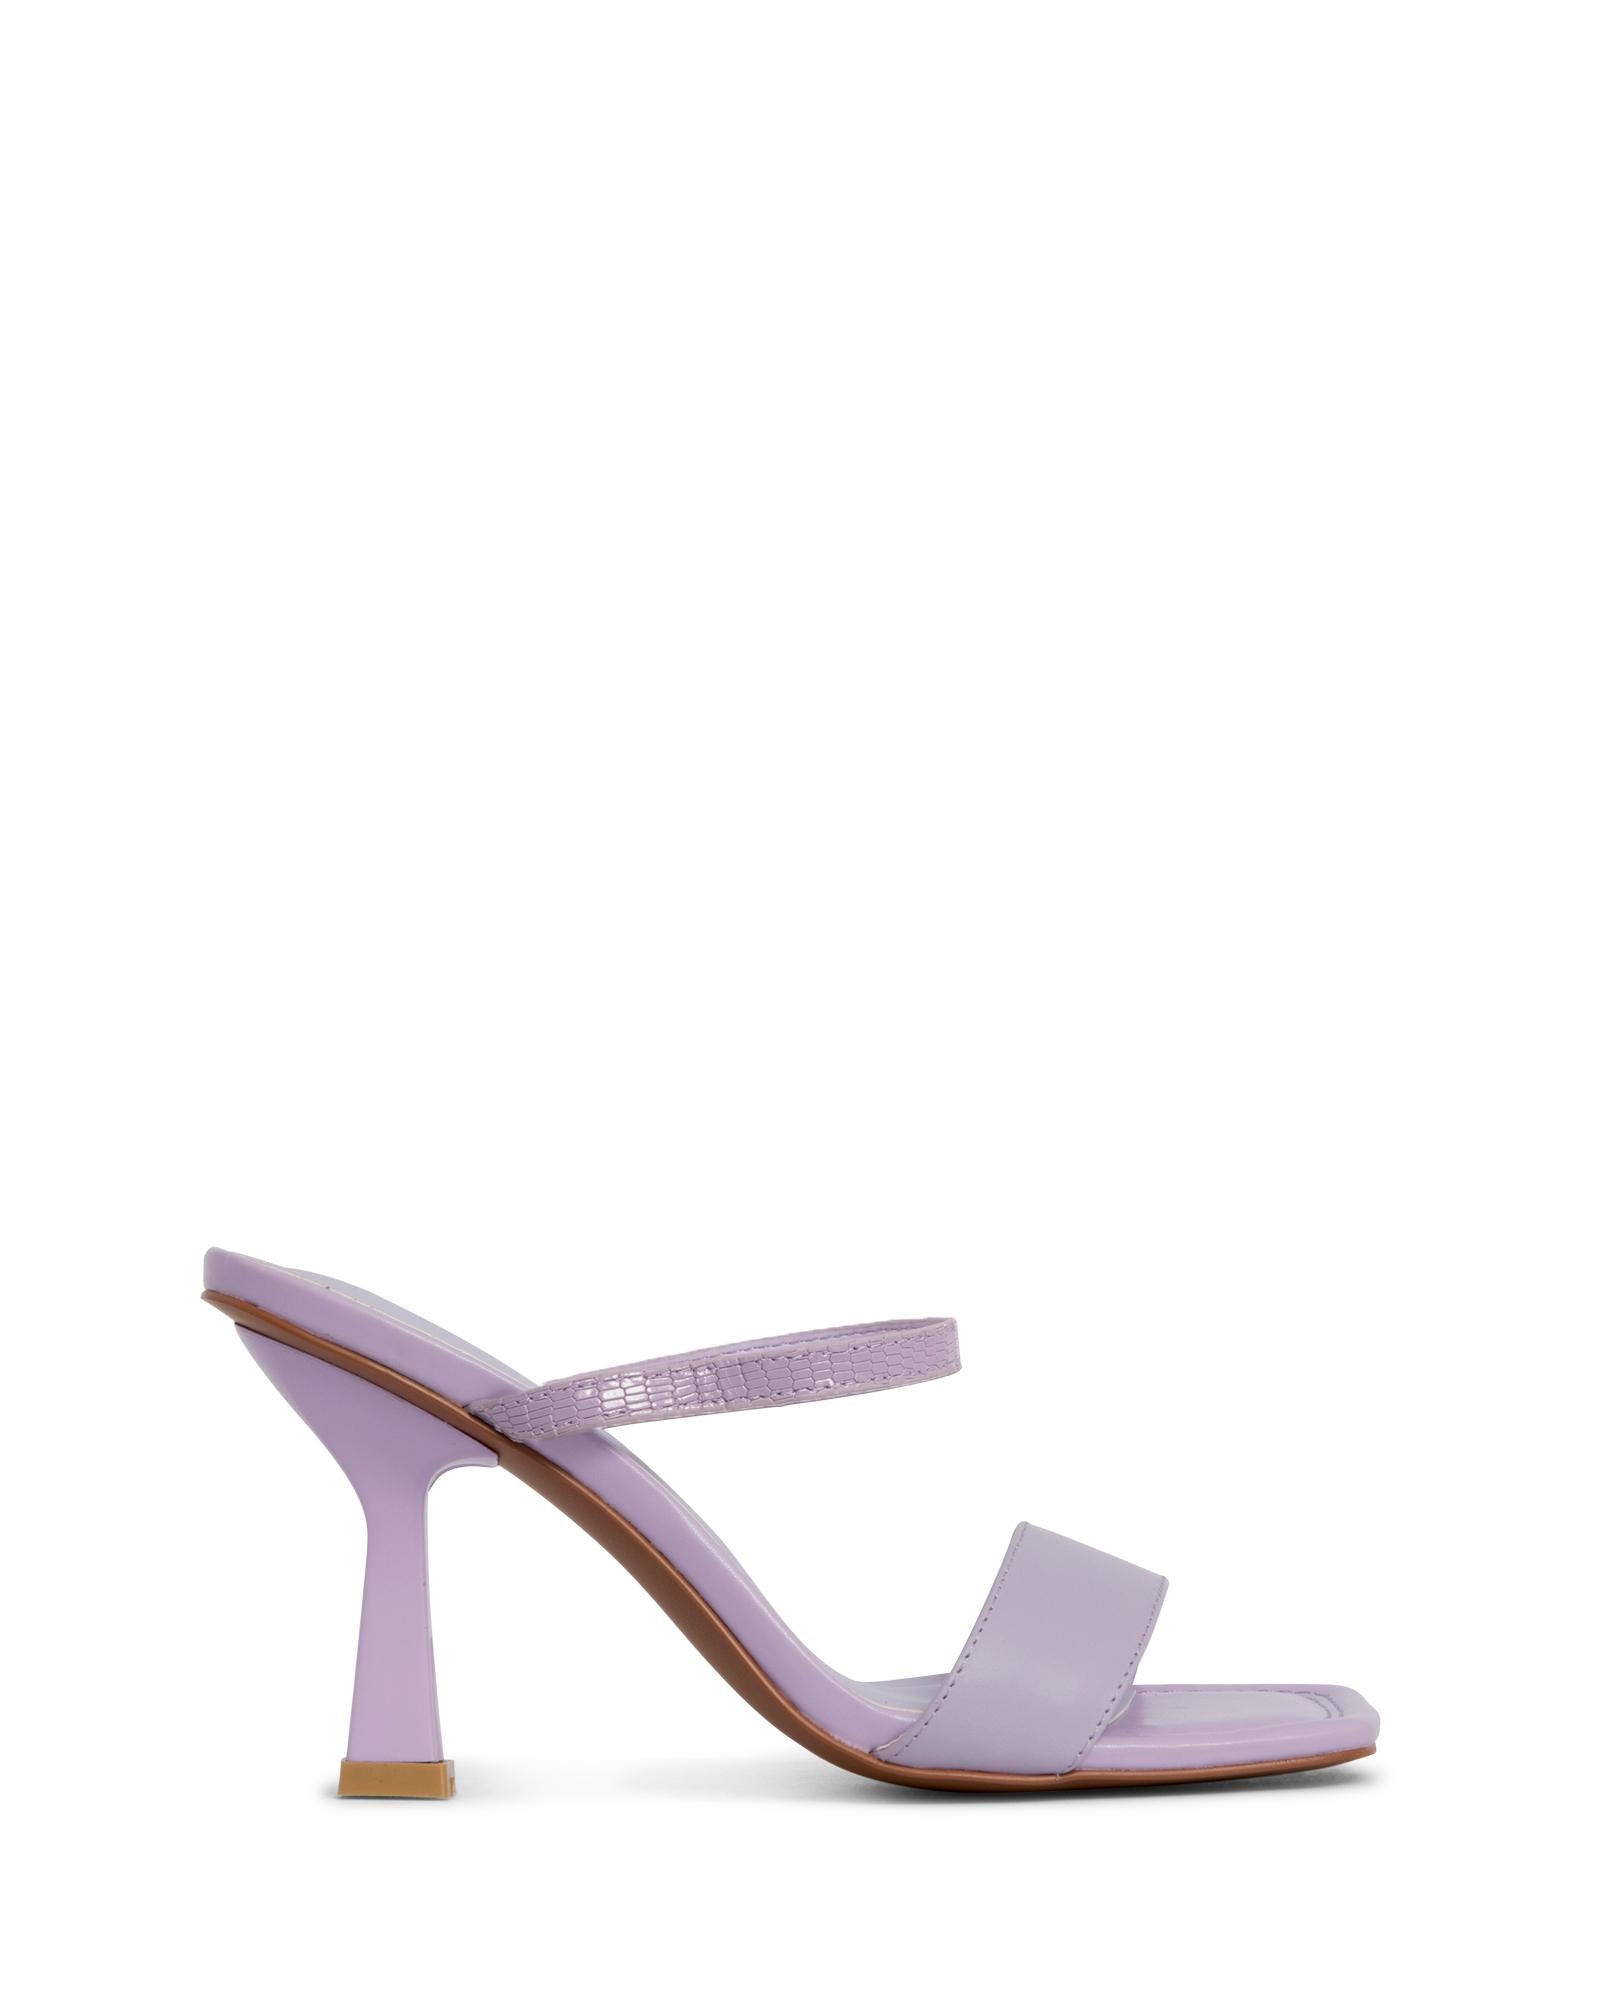 Brazil Lilac 9cm Thin Heel with Elasticed Strap and a Square Toe